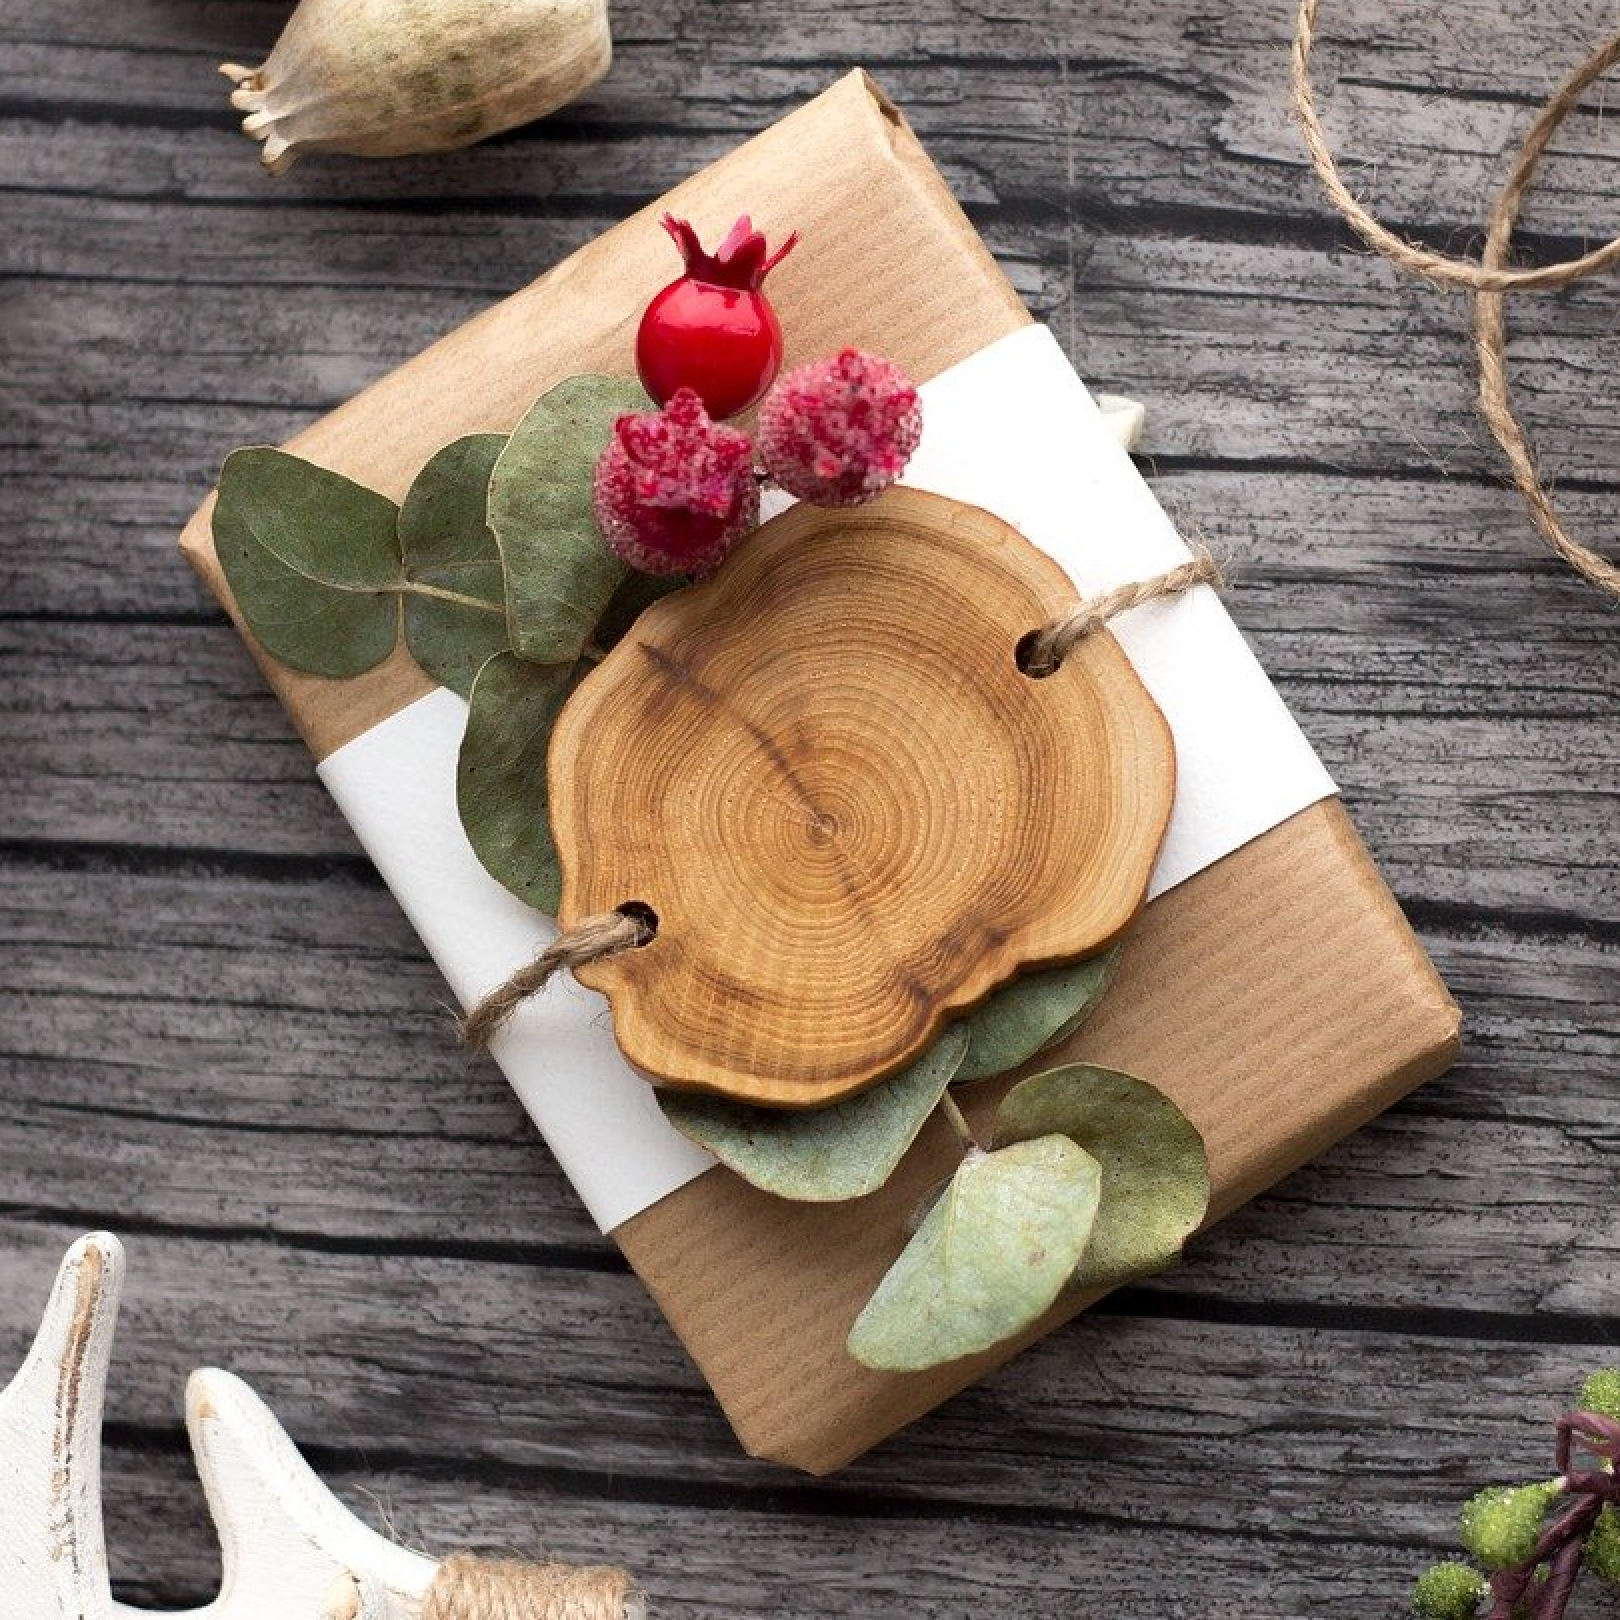 Natural Earth Paint Featured in FiveADRIFT's Eco-Friendly Holiday Gift Guide!